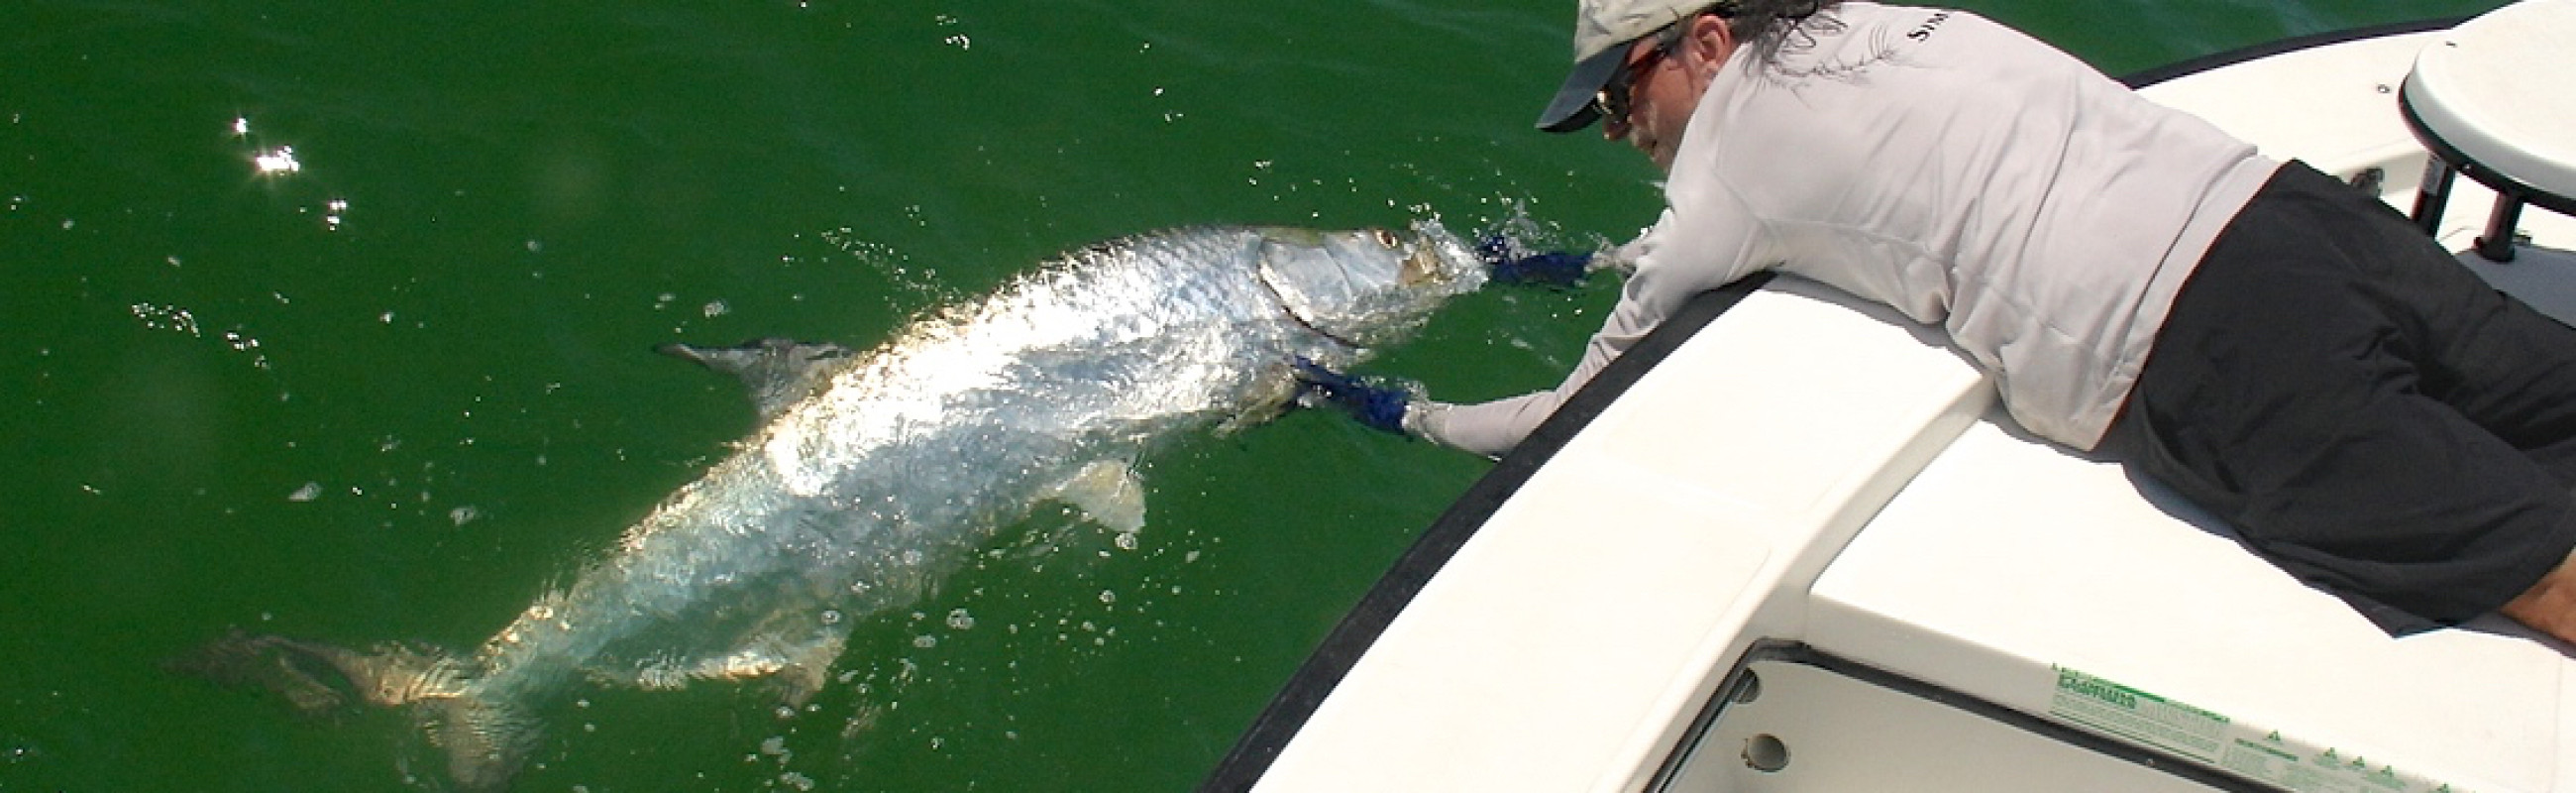 Fly Fishing Saltwater with Salty Fly Charters • St. Pete Beach Vacation Bucket List Item